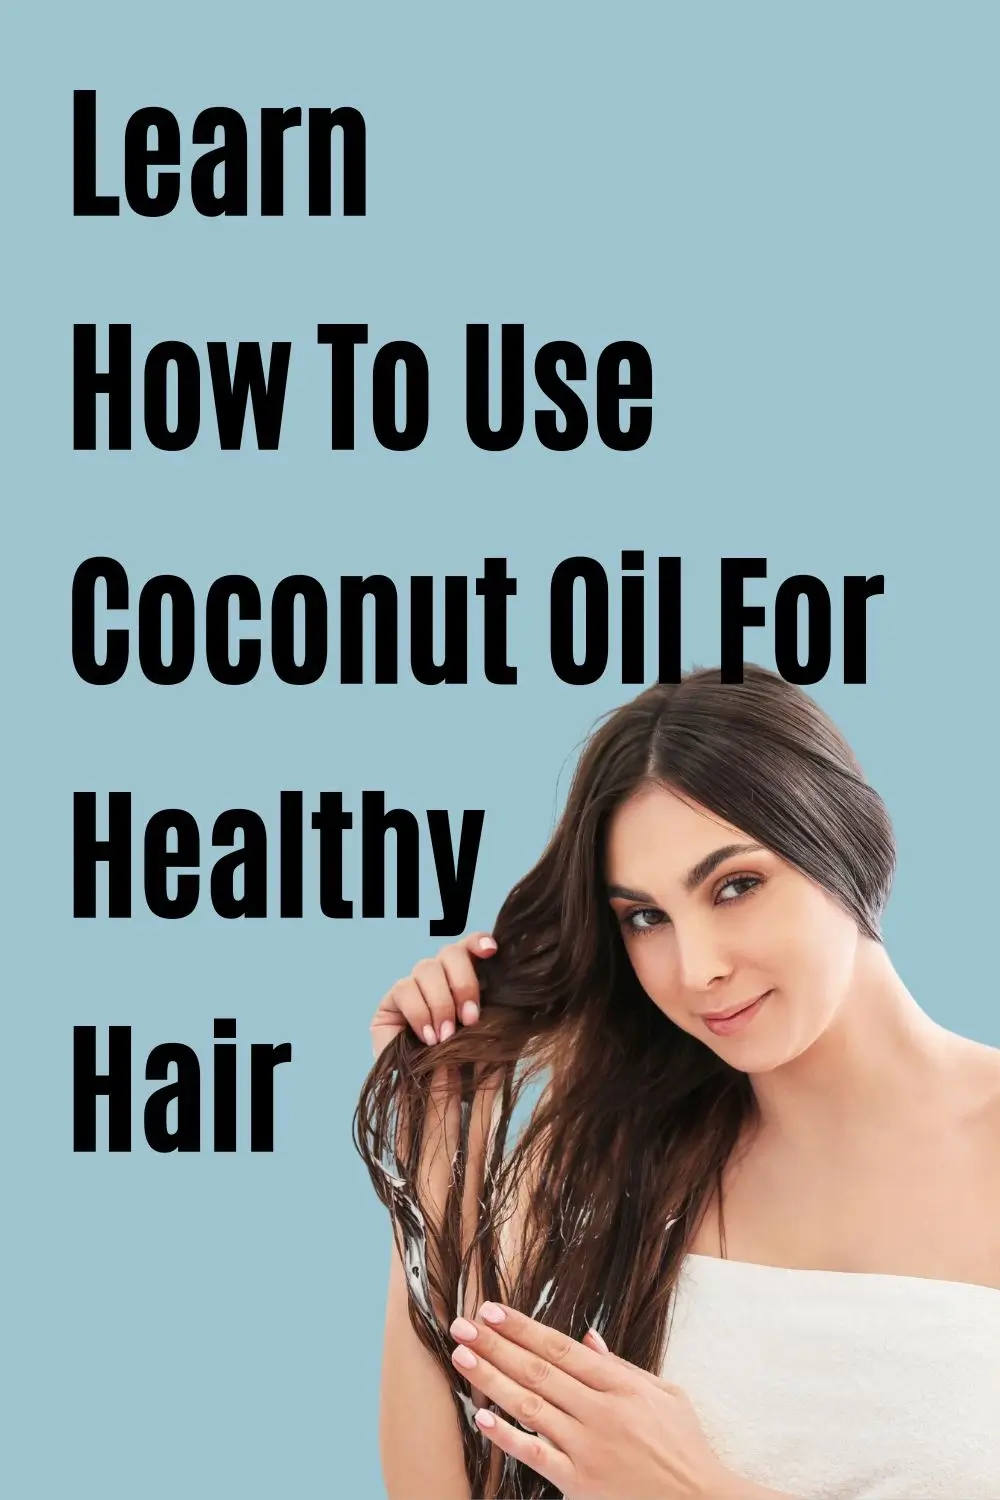 How to use coconut oil for your hair. DIY recipes